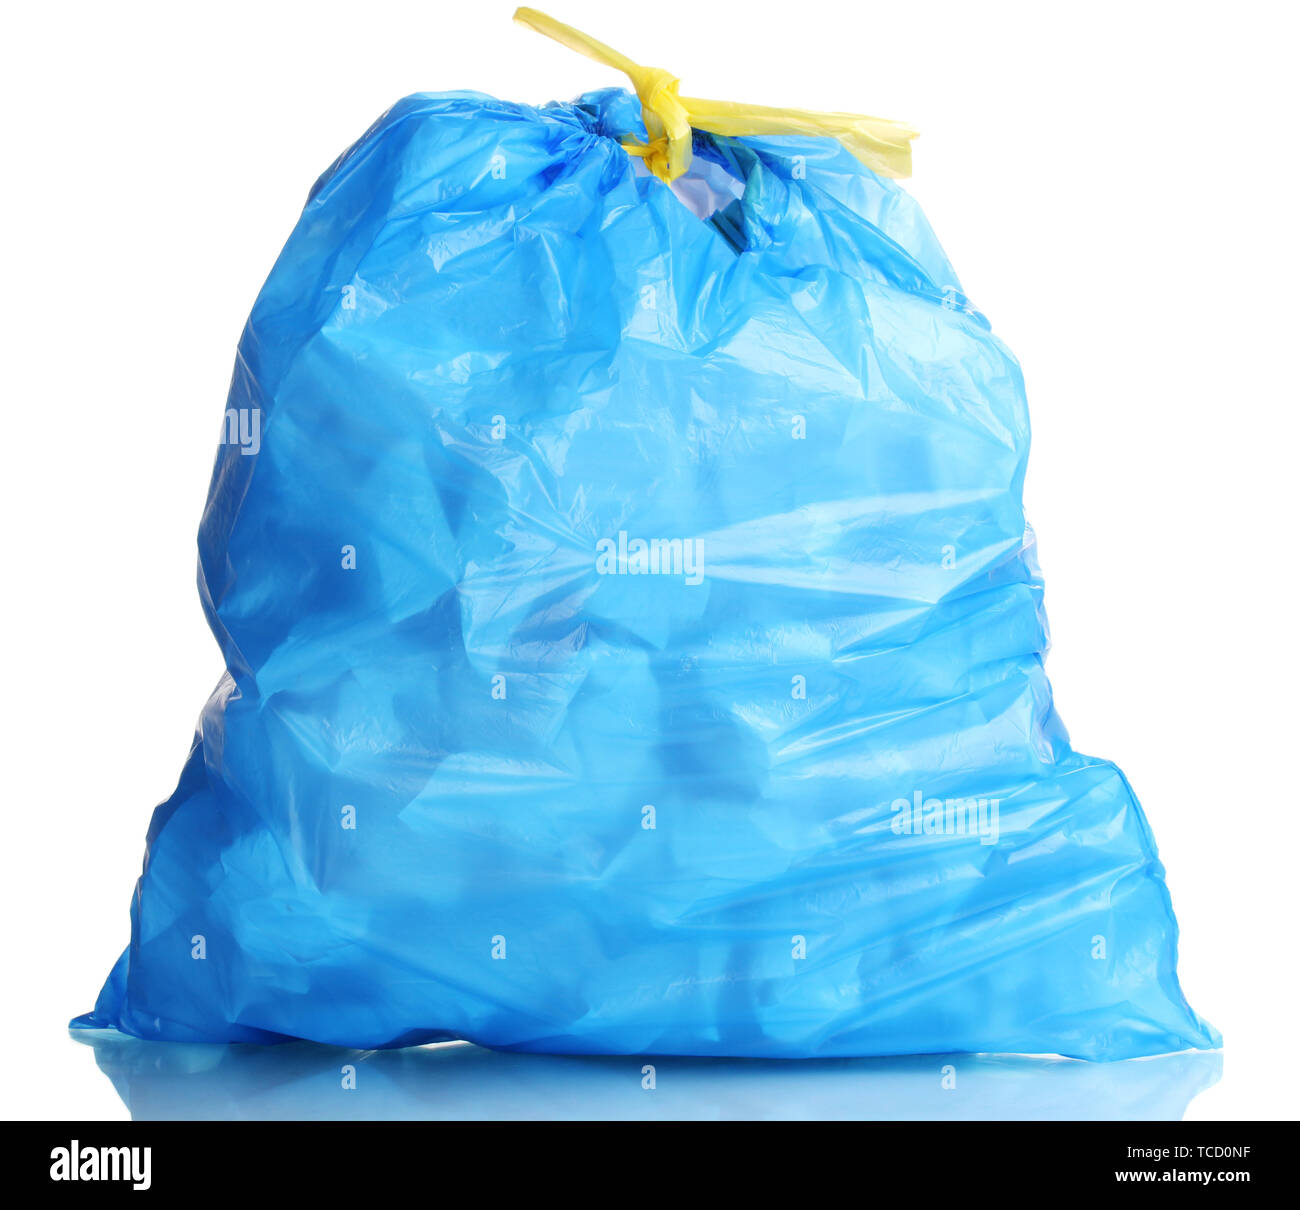 https://c8.alamy.com/comp/TCD0NF/blue-garbage-bag-with-trash-isolated-on-white-TCD0NF.jpg